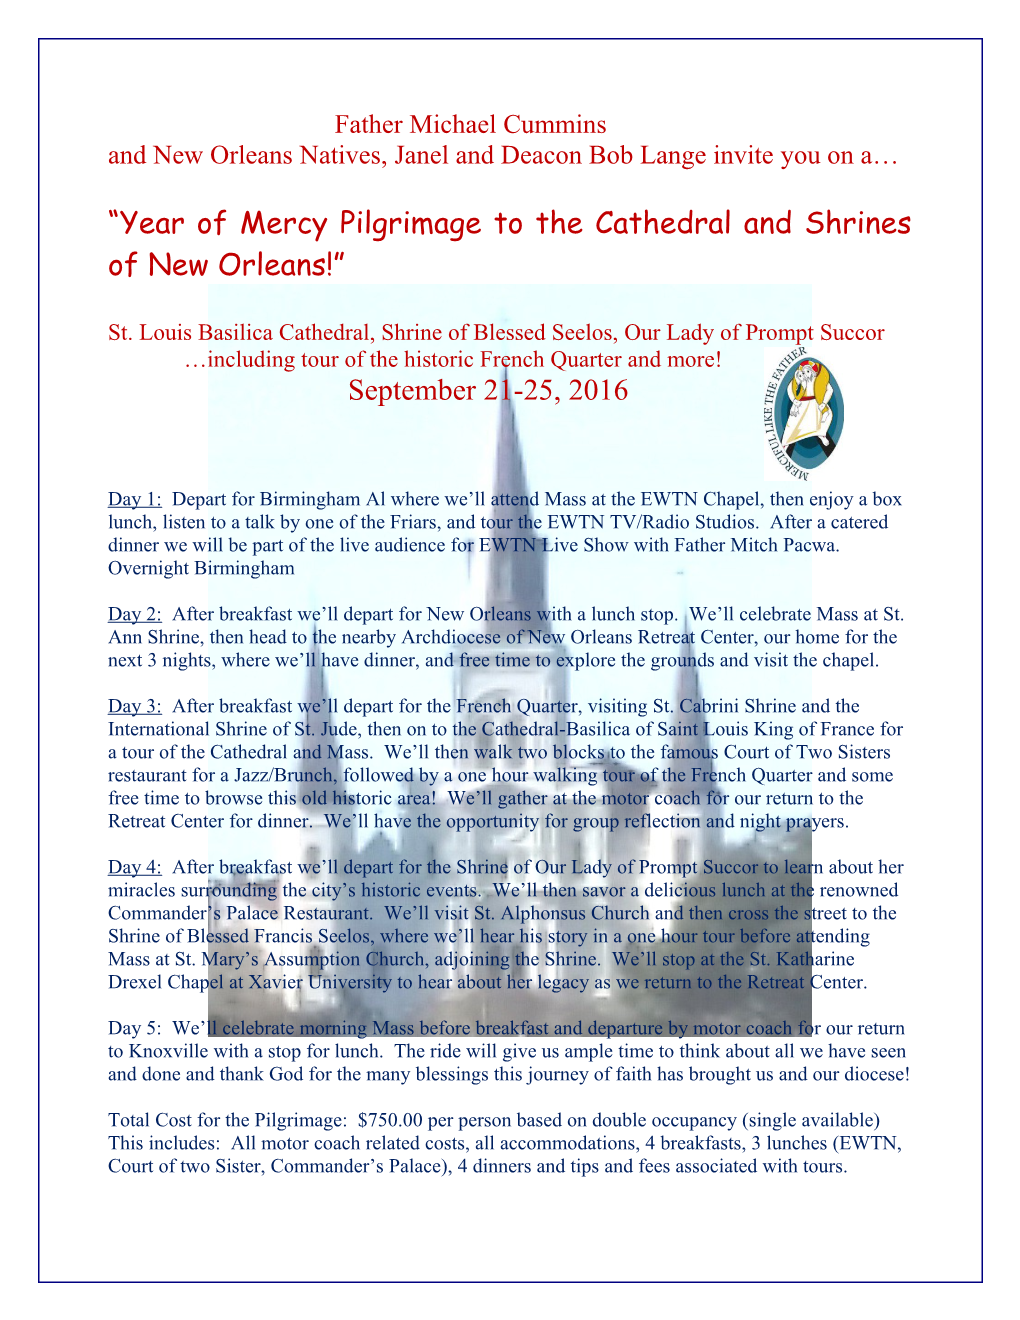 Year of Mercy Pilgrimage to the Cathedral and Shrines of New Orleans